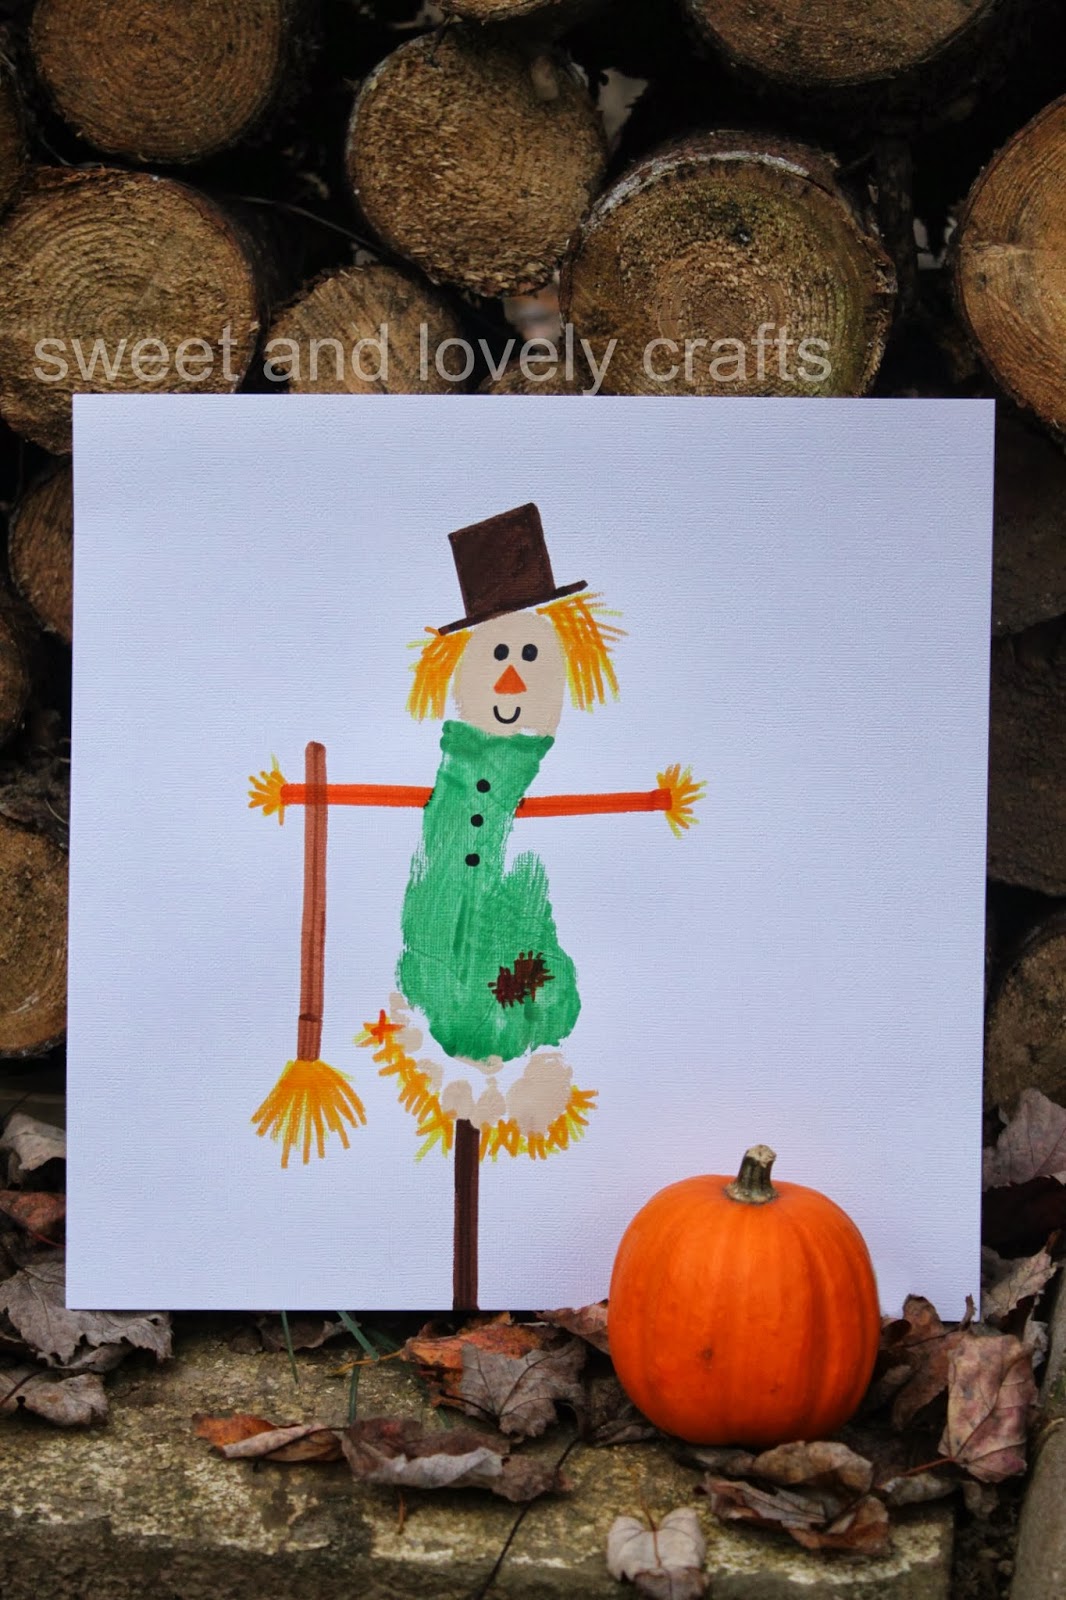 A cute idea for showing off your adorable Scarecrow Footprint craft!